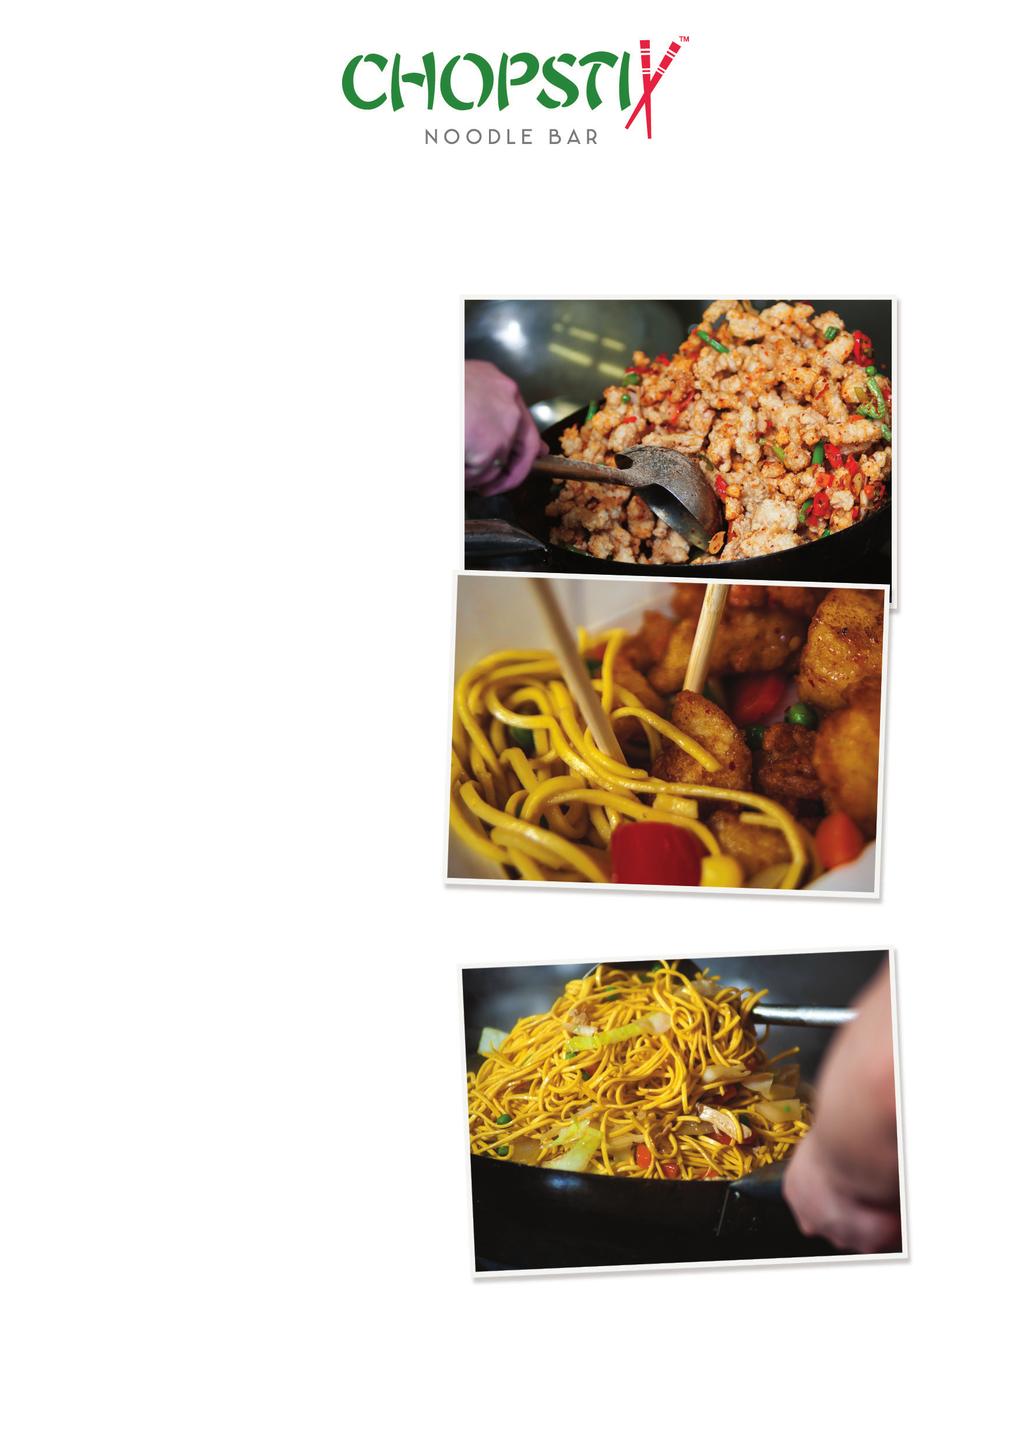 Full Product Range & Menu Noodles and rice - Vegetables Noodles - Egg Fried Rice Toppings - Sweet & Sour Chicken - Sweet Chilli Chicken - Caramel Chicken - Black Bean Chicken - Salt & Pepper Chicken